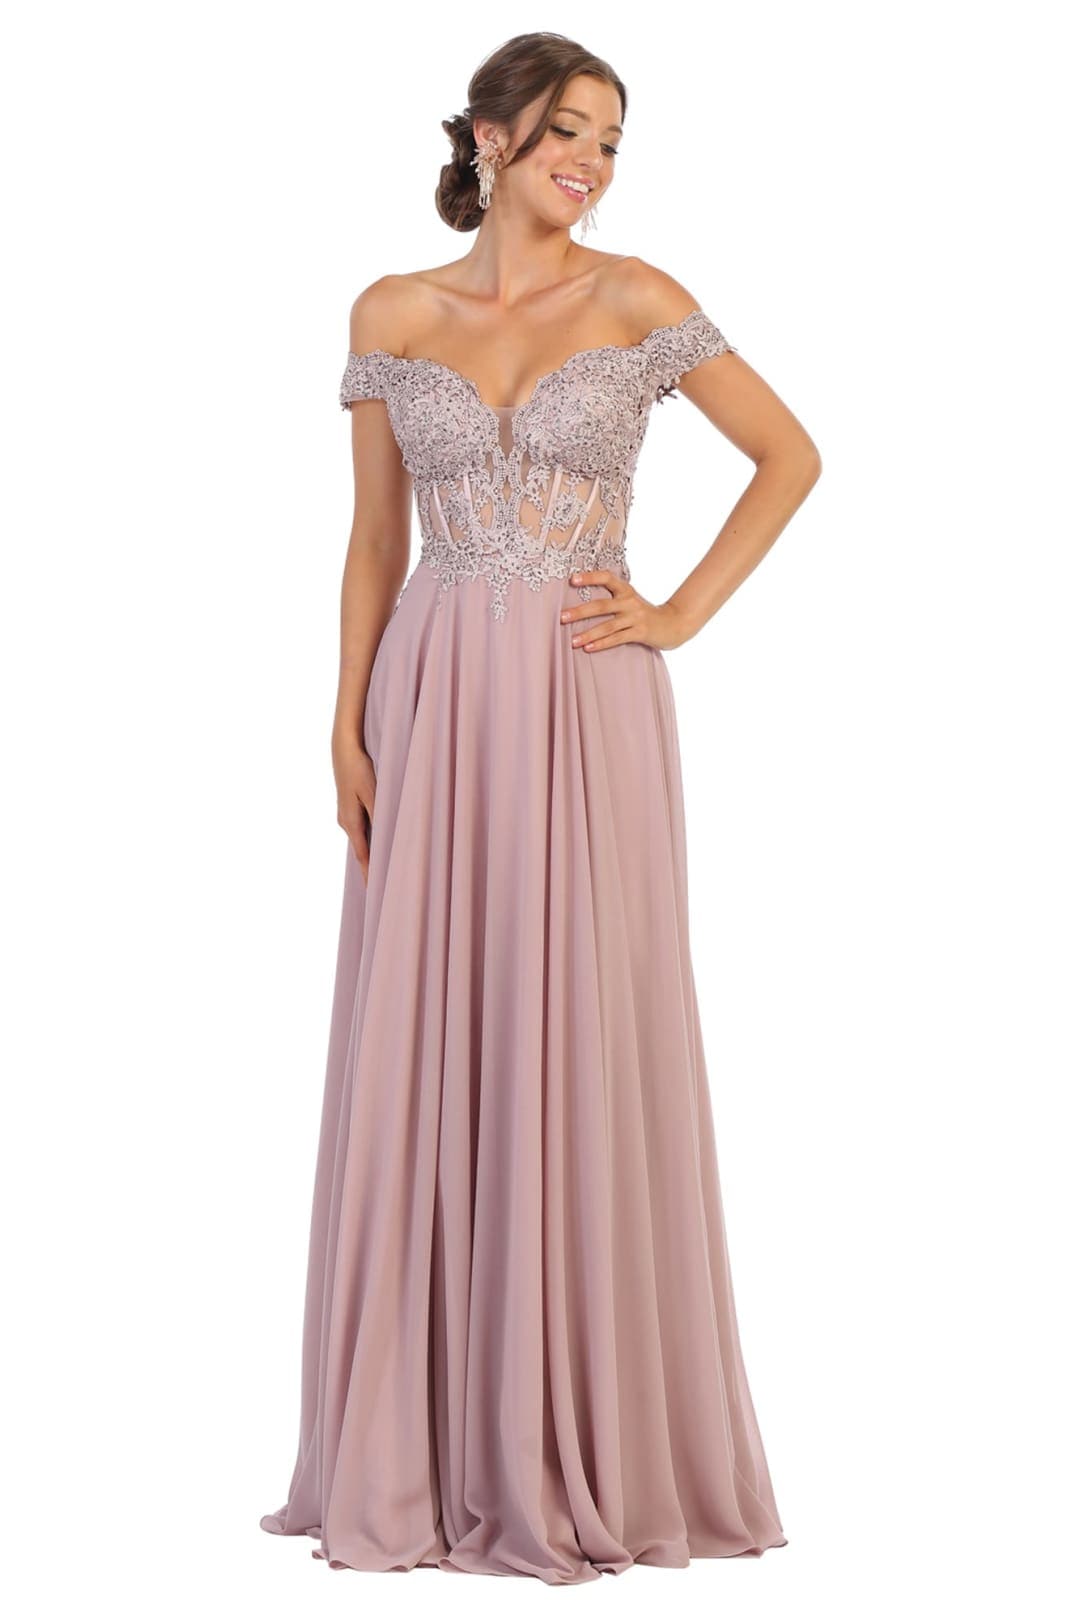 Elegant Formal Embroidered Prom Gown And Plus Size - MAUVE / 4